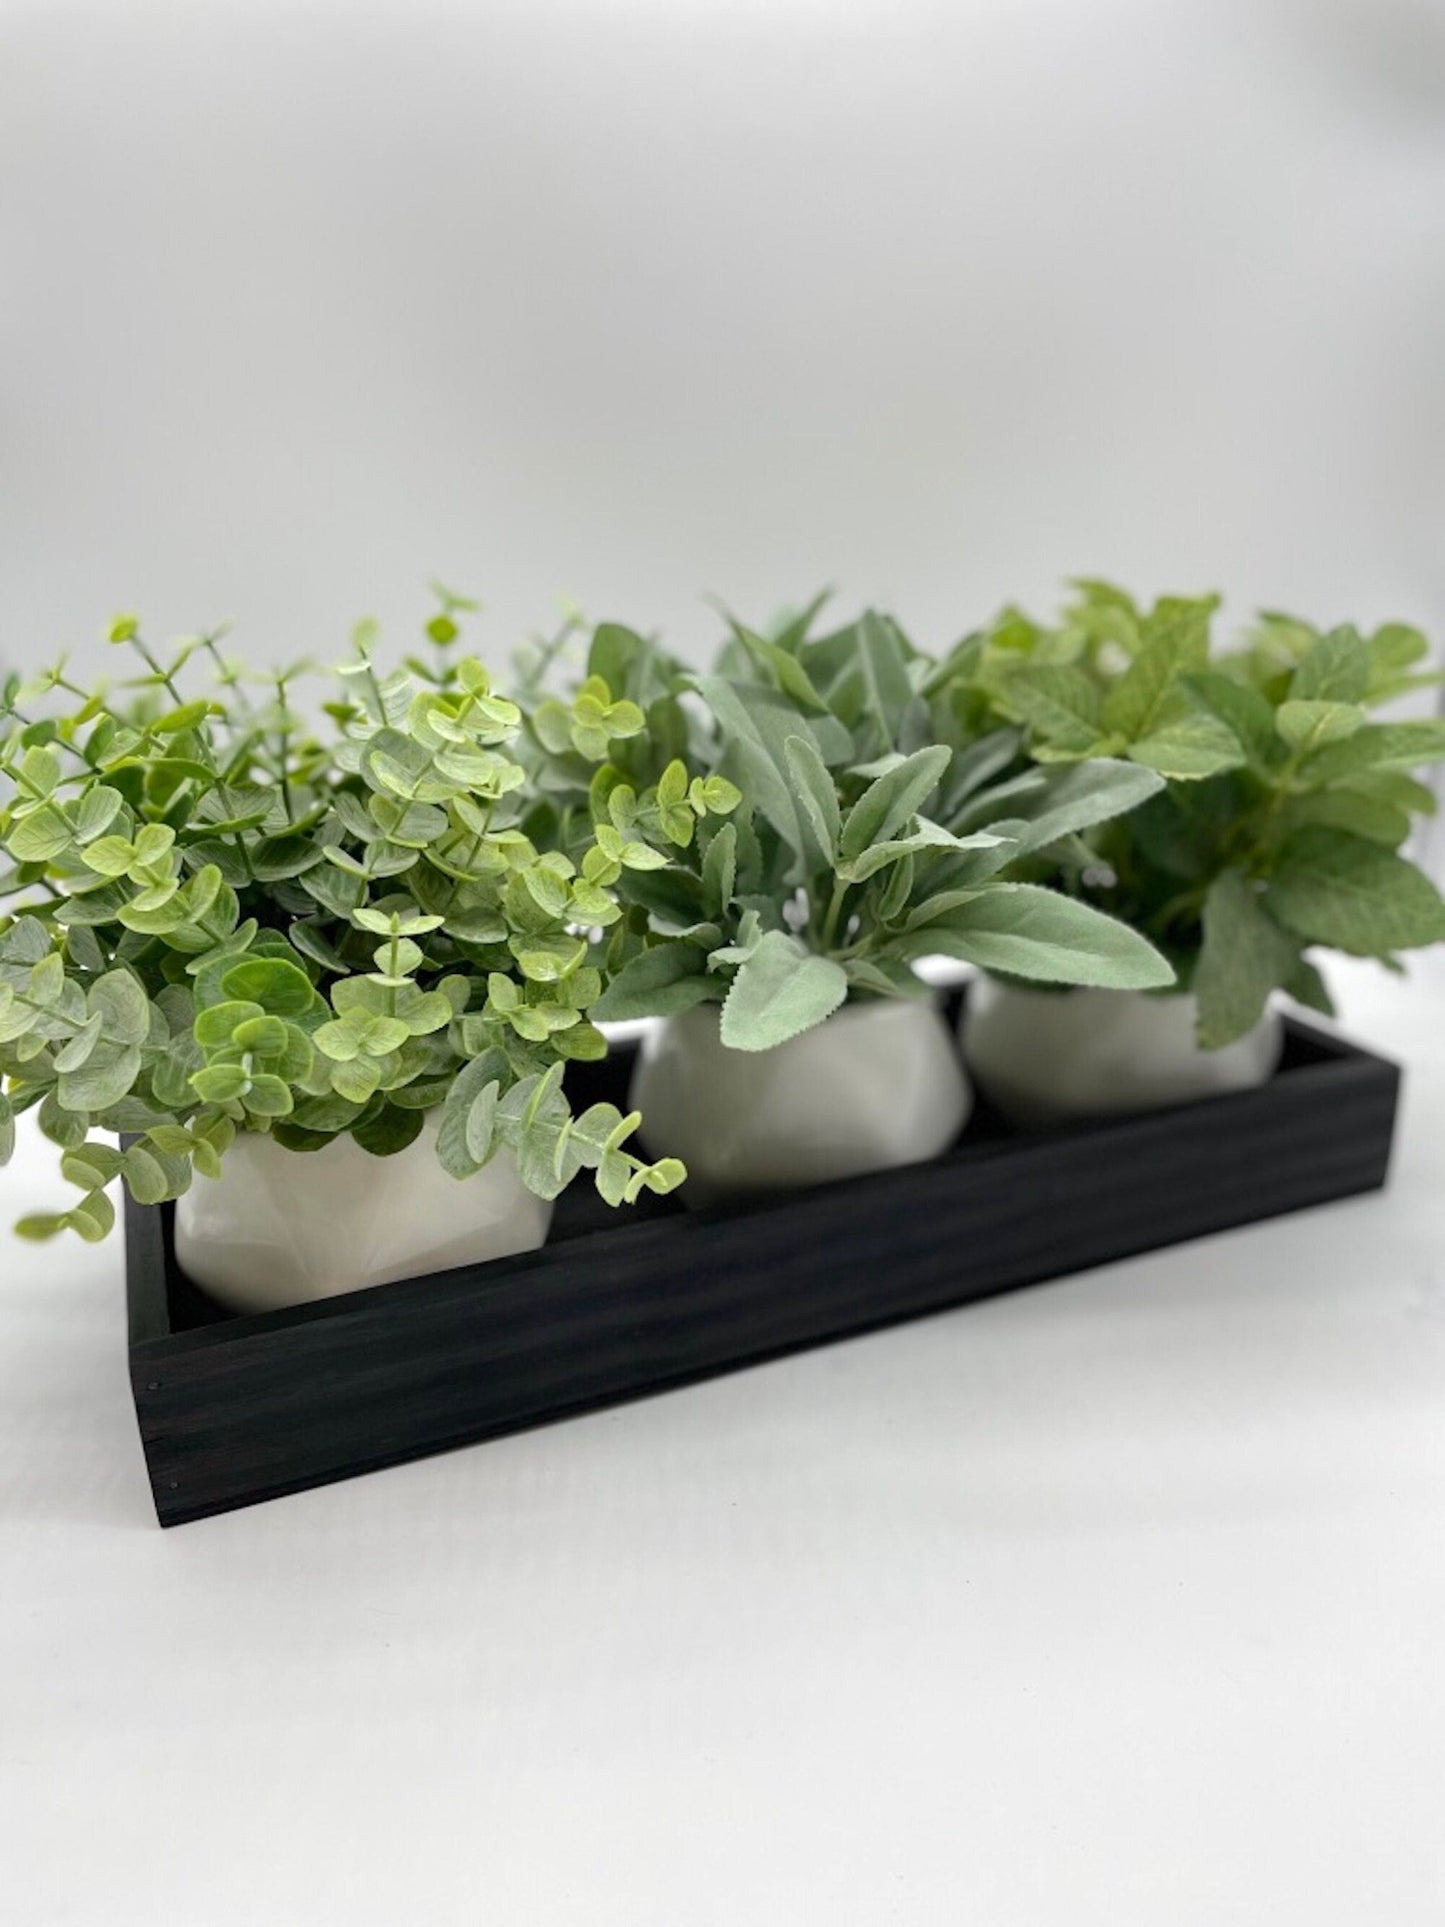 Herb Themed Arrangement SET of 3, Fake Plants Home Decor on Wooden Tray